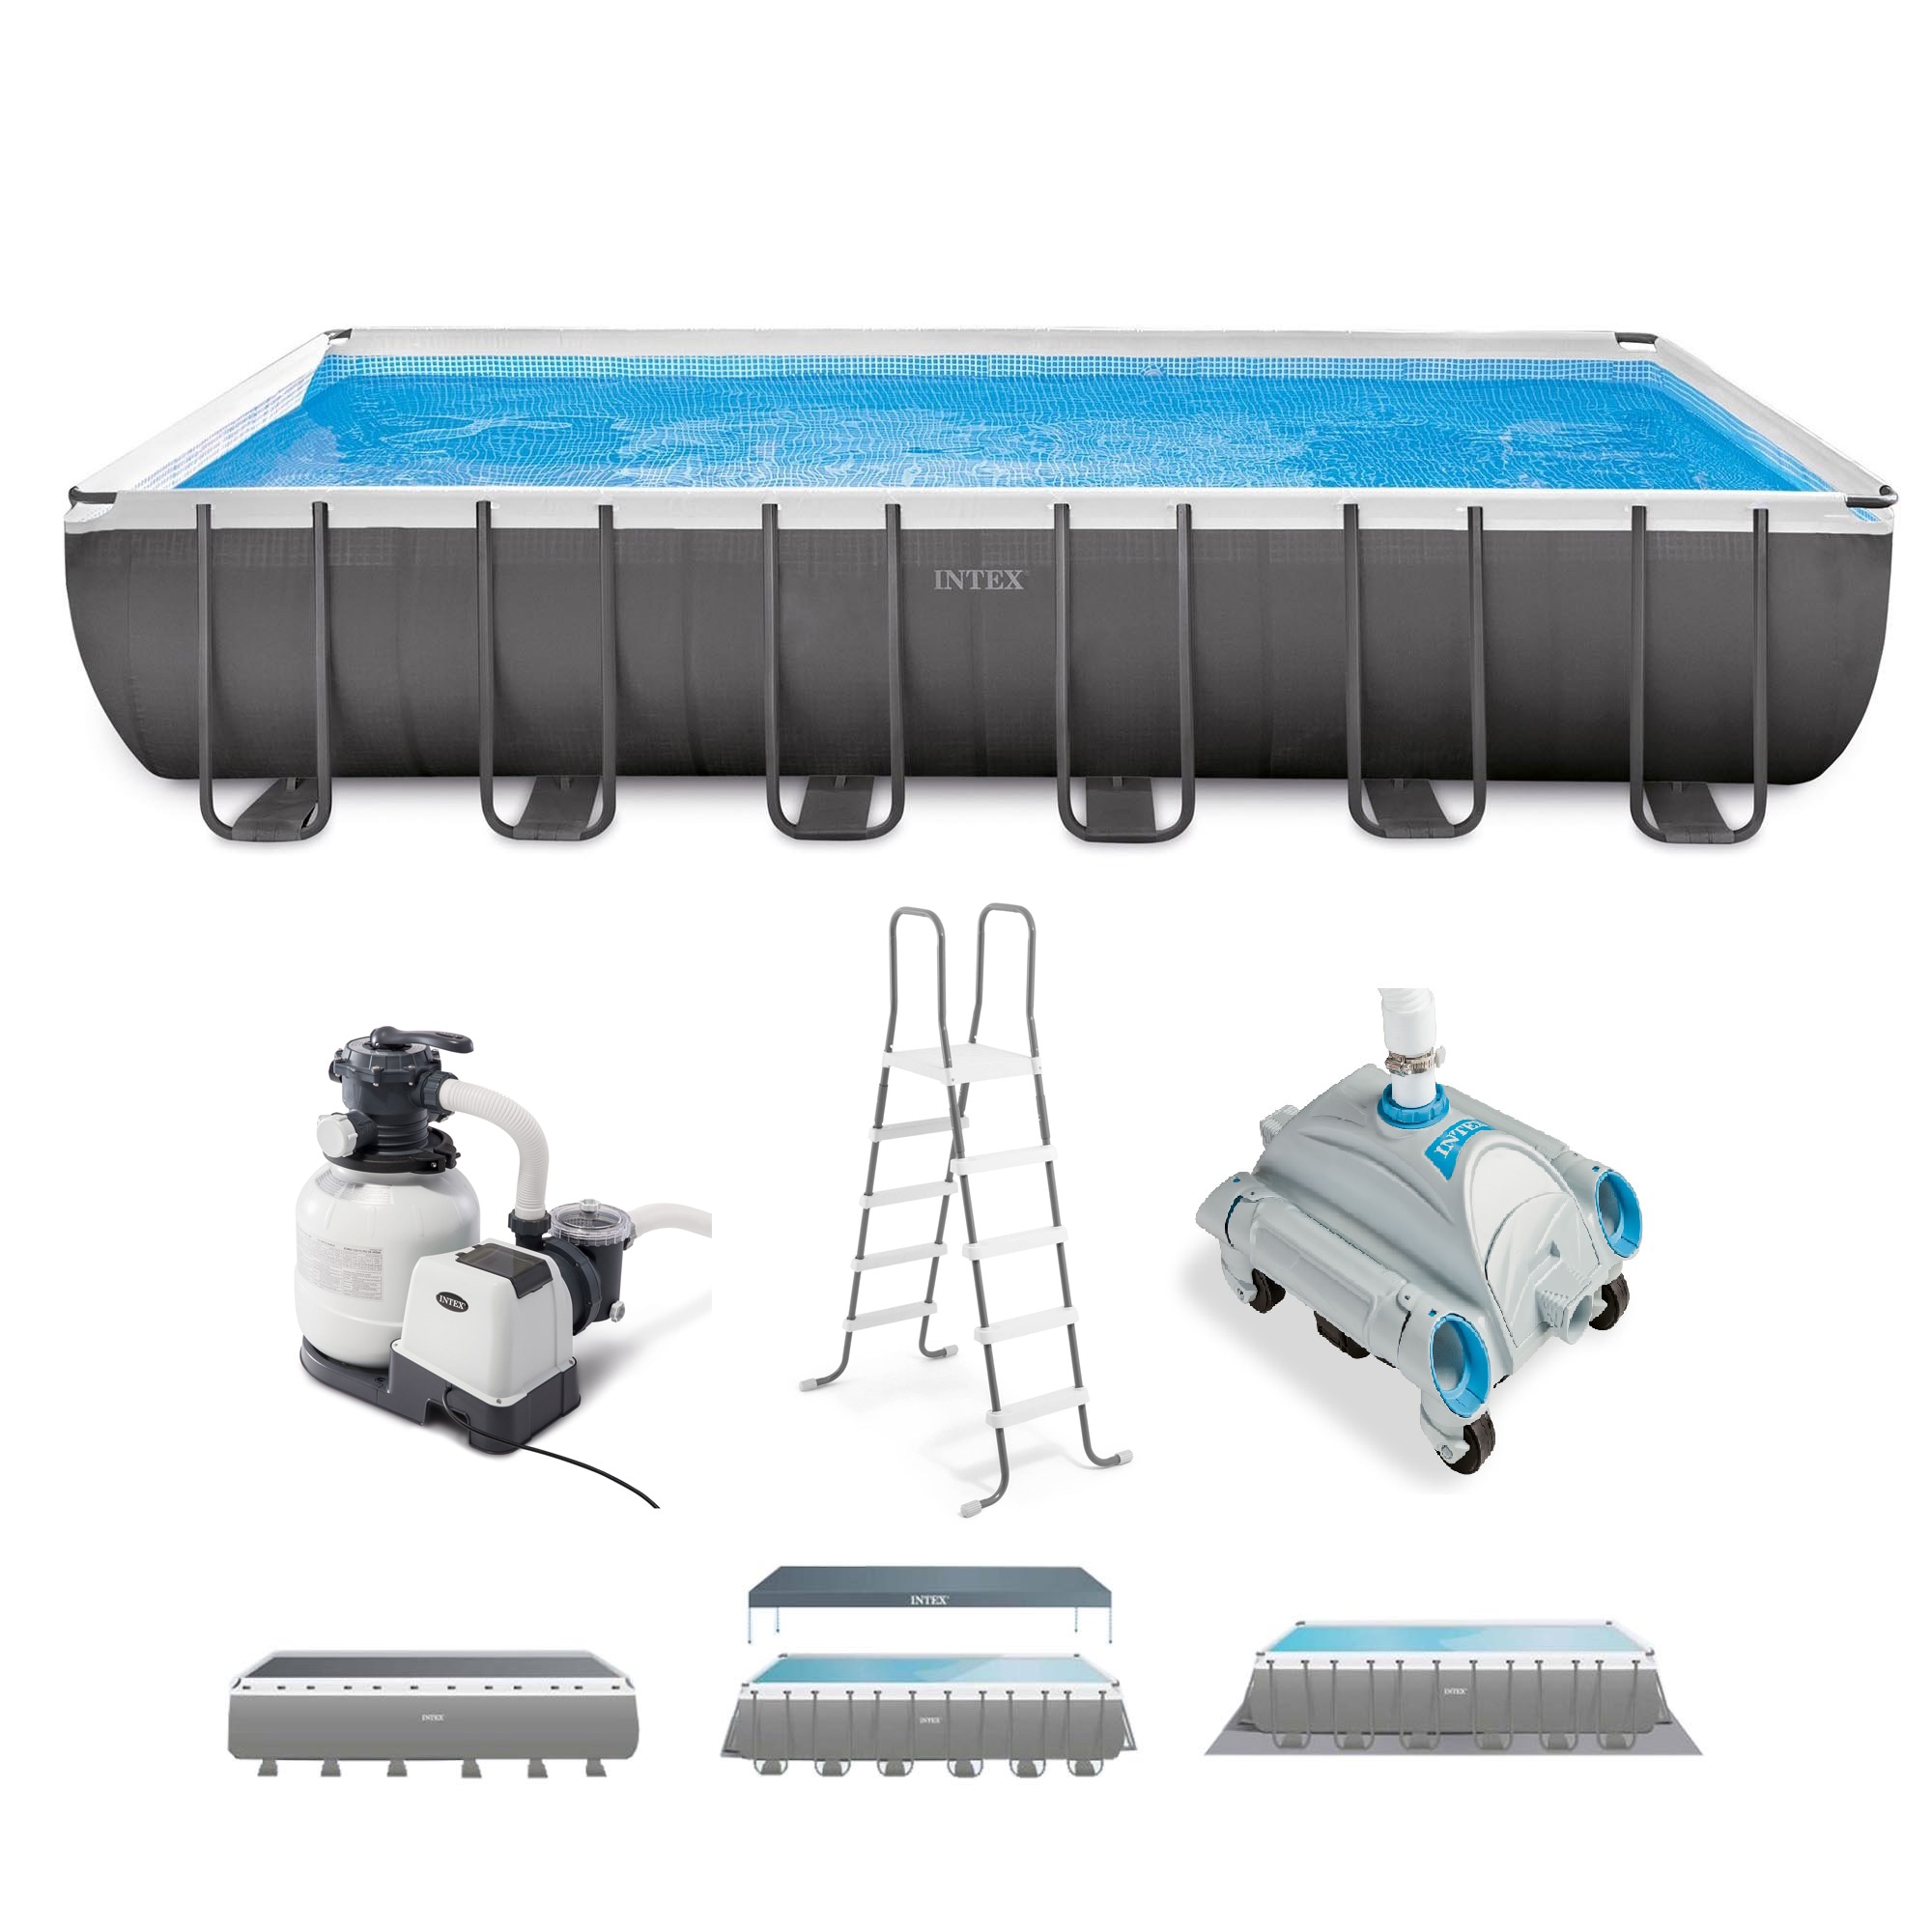 Intex 24-ft x 12-ft x 52-in Rectangle Above-Ground the Above-Ground Pools department Lowes.com